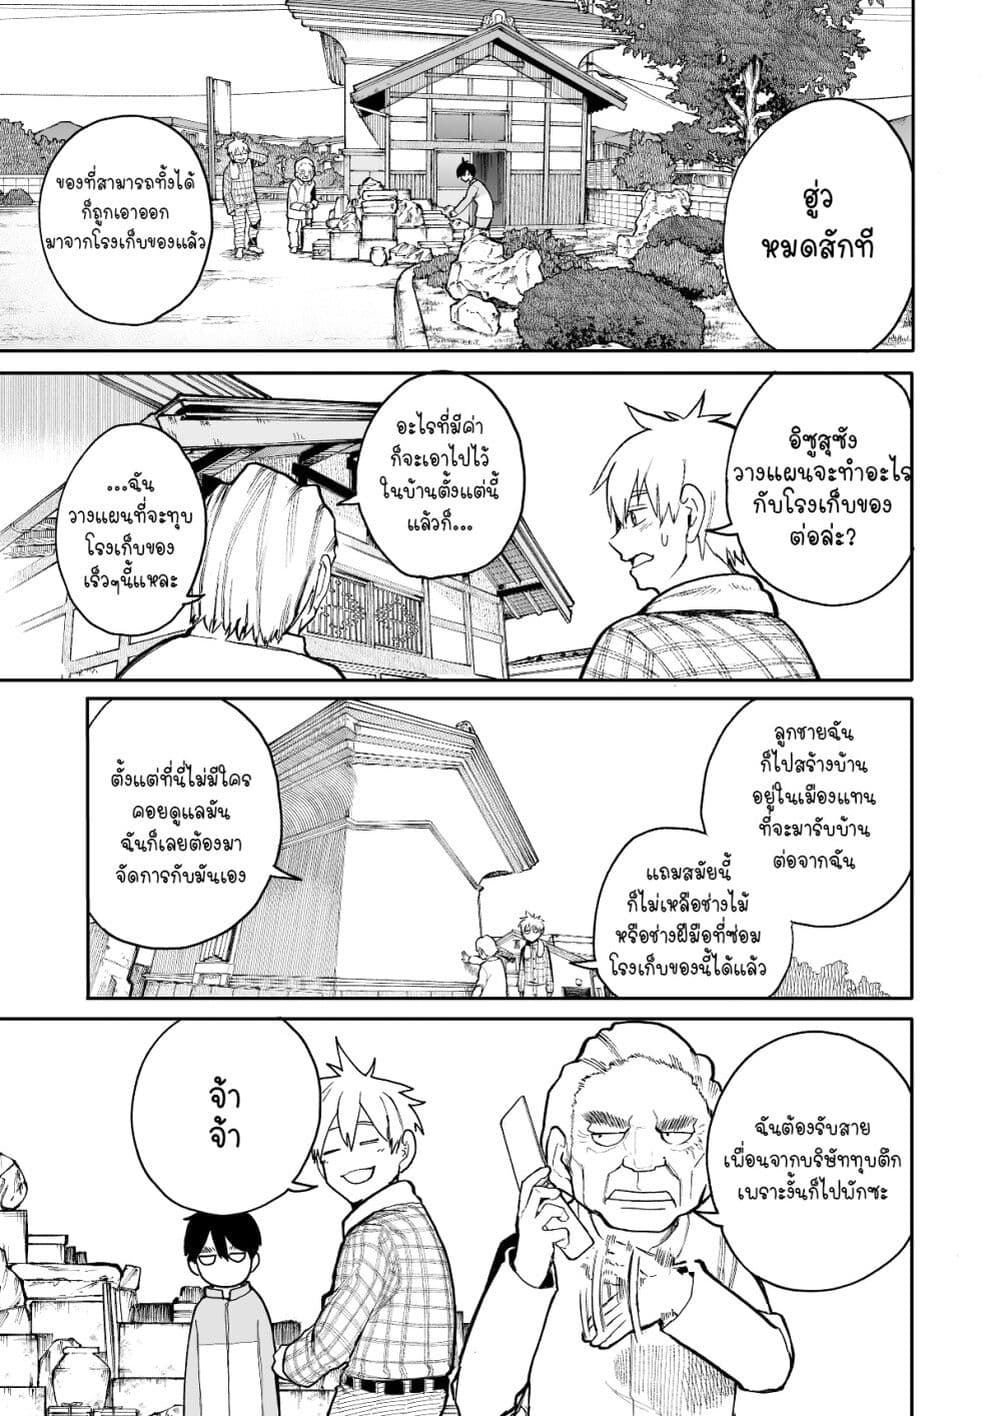 A Story About A Grampa and Granma Returned Back to their Youth คู่รักวัยดึกหวนคืนวัยหวาน 62-62